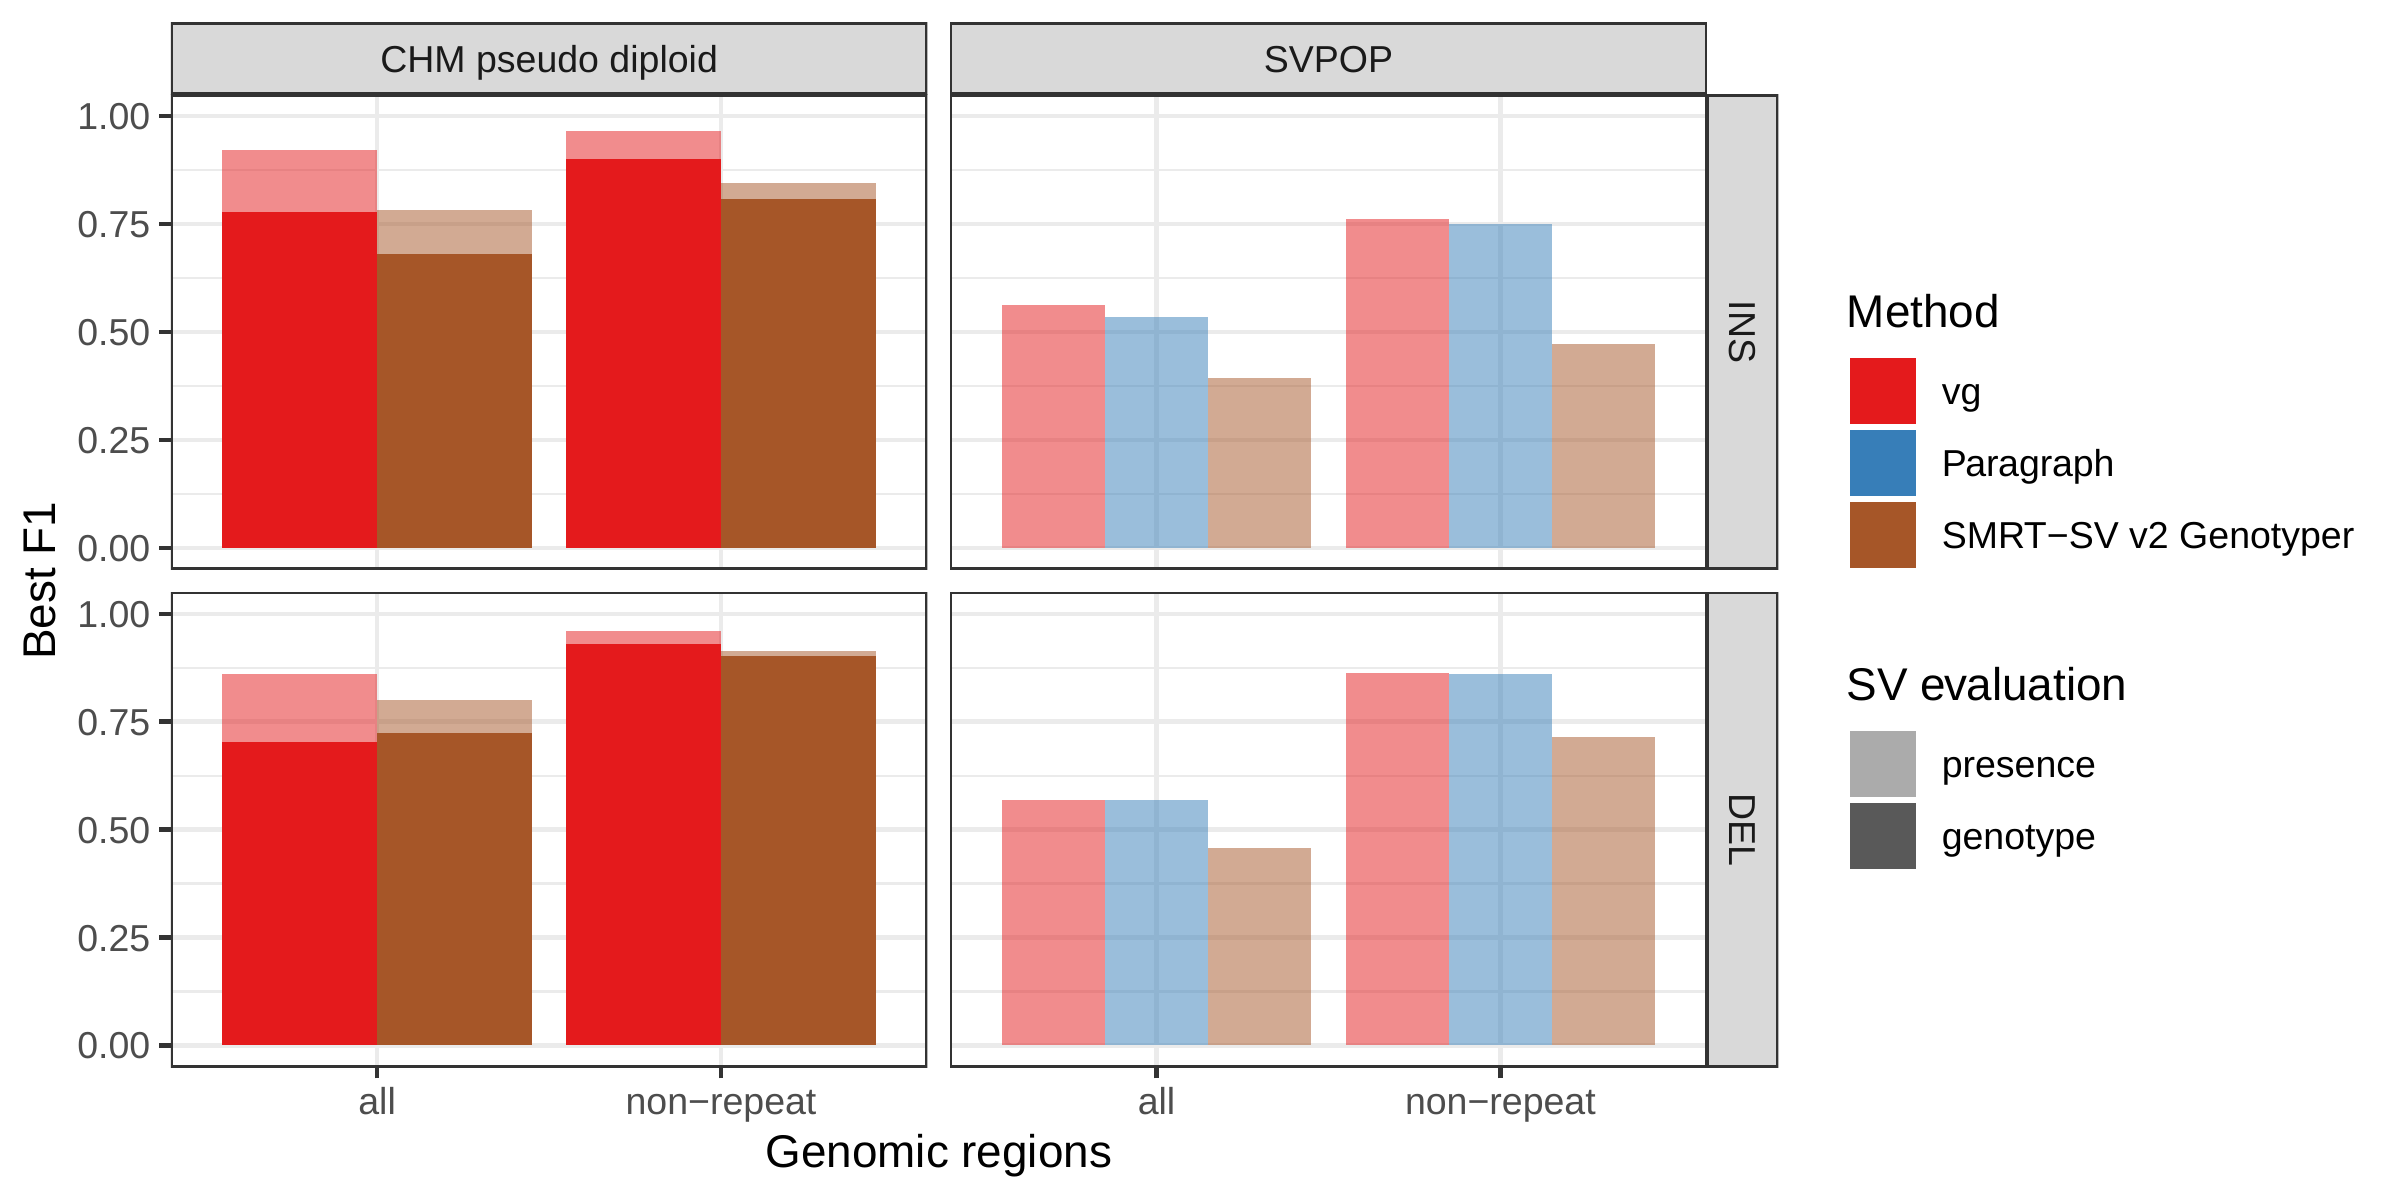 Figure 4: Structural variants from SMRT-SV v2 [5]. The pseudo-diploid genome built from two CHM cell lines and one negative control sample was originally used to train SMRT-SV v2 Genotyper in Audano et al.[5]. It contains 16,180 SVs. The SVPOP panel shows the combined results for the HG00514, HG00733, and NA19240 individuals, three of the 15 individuals used to generate the high-quality SV catalog in Audano et al. [5]. Here, we report the maximum F1 score (y-axis) for each method (color), across the whole genome or focusing on non-repeat regions (x-axis). We evaluated the ability to predict the presence of an SV (transparent bars) and the exact genotype (solid bars). Genotype information is not available in the SVPOP catalog hence genotyping performance could not be evaluated.